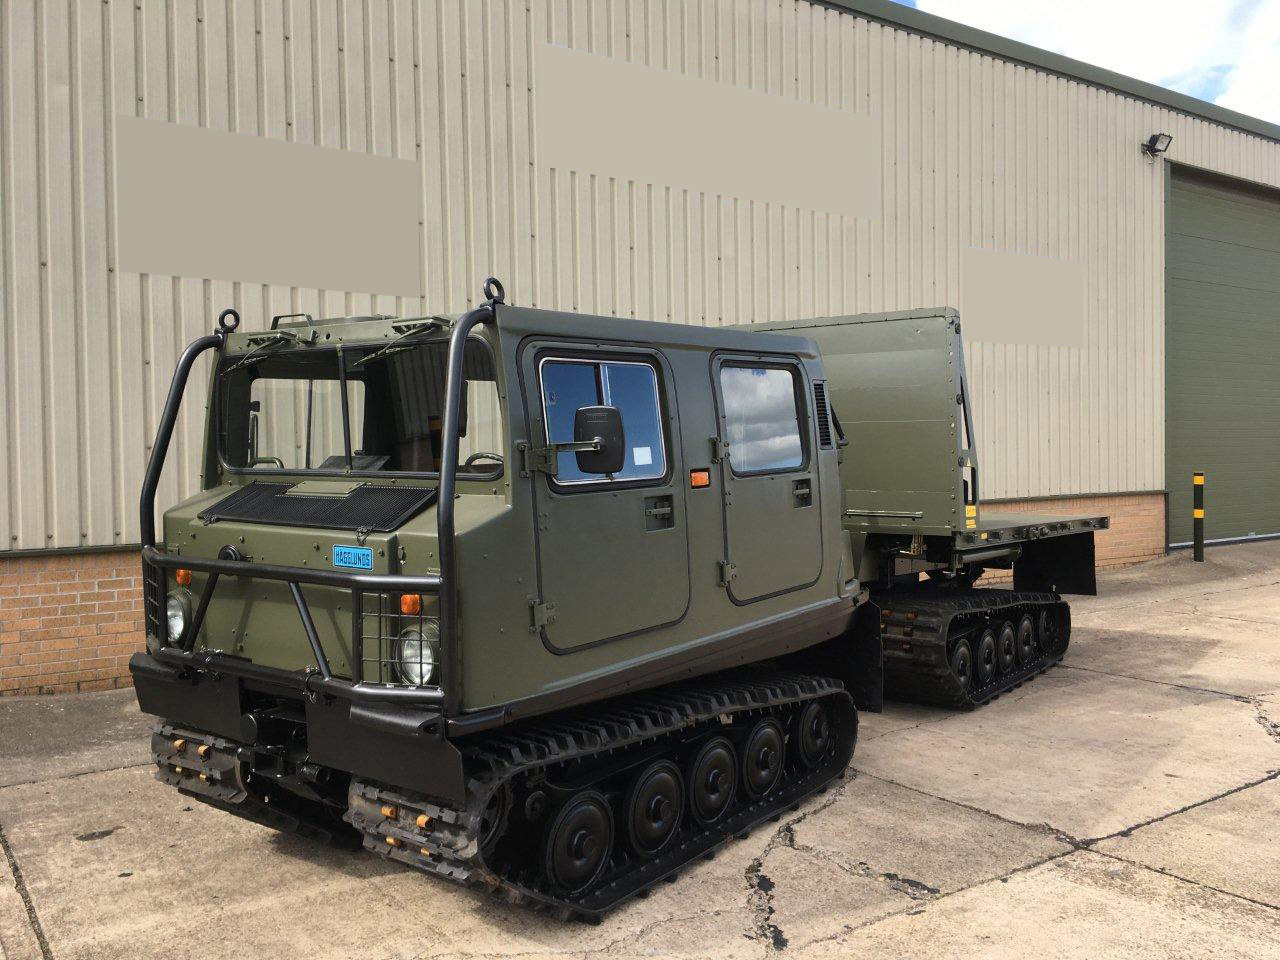 military vehicles for sale - <a href='/index.php/manufacturer/hagglunds/50303-hagglunds-bv206-load-carrier-with-crane' title='Read more...' class='joodb_titletink'>Hagglunds Bv206 Load Carrier with Crane</a>